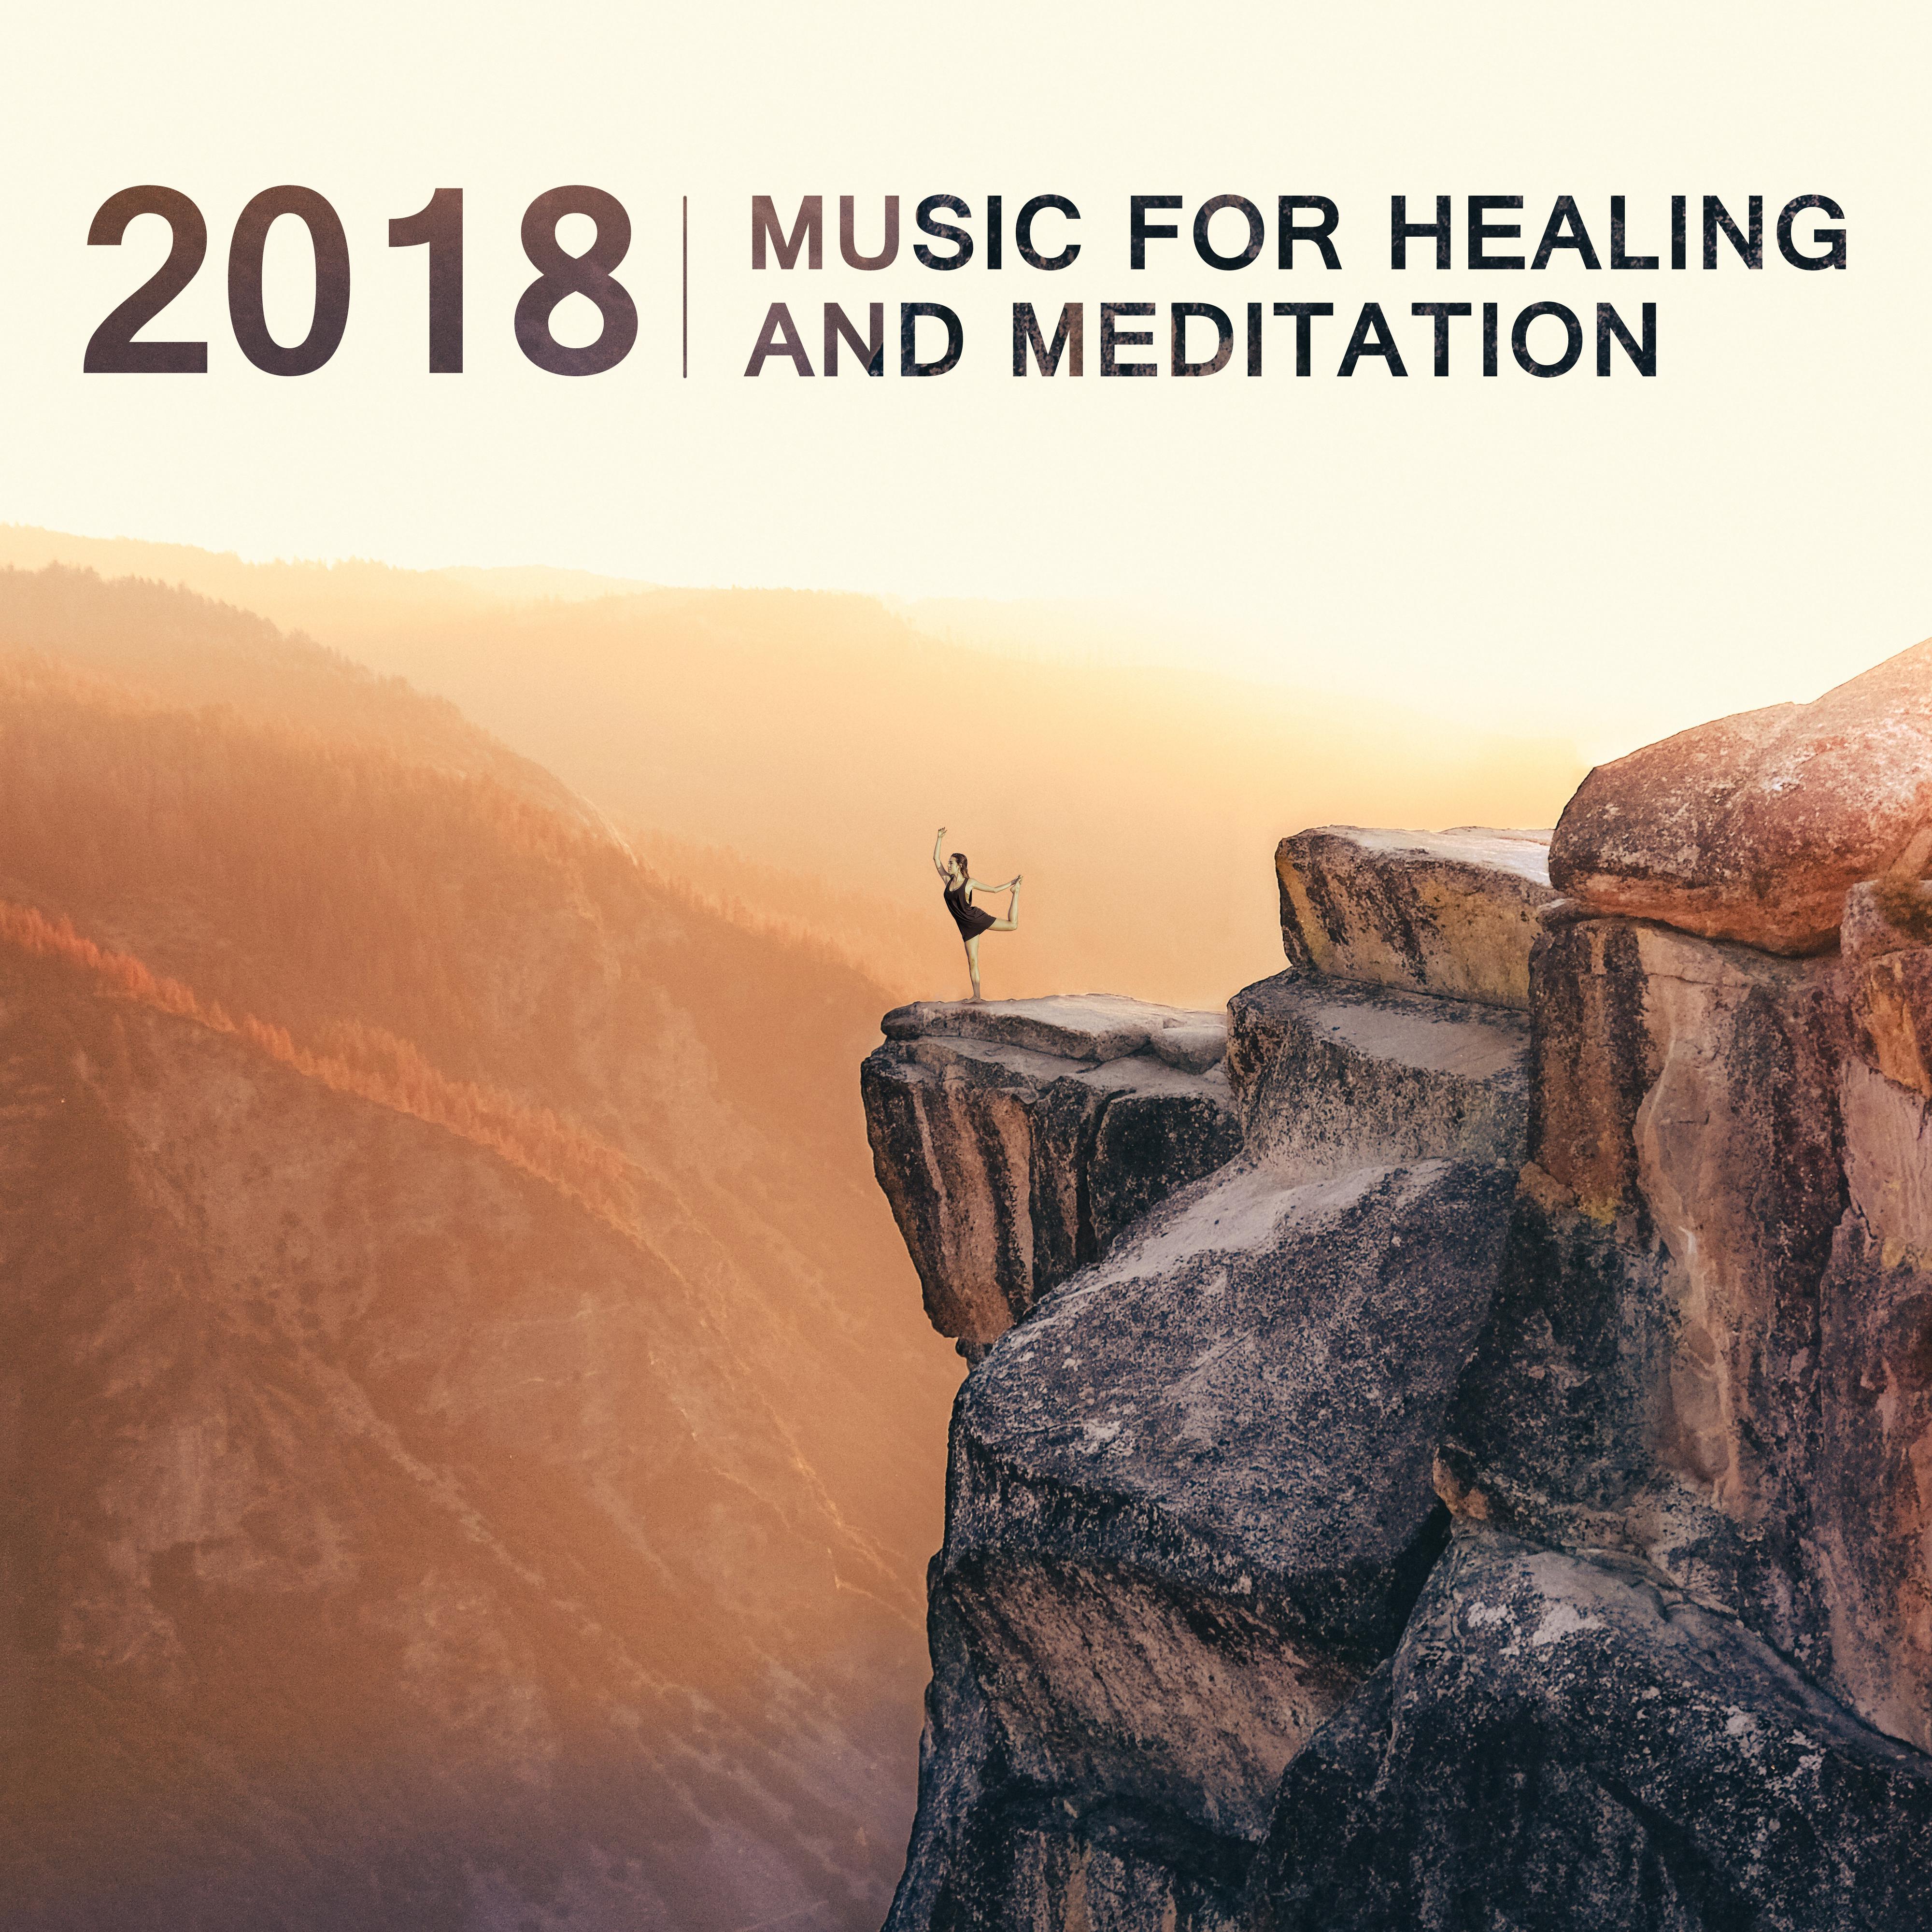 2018 Music for Healing and Meditation